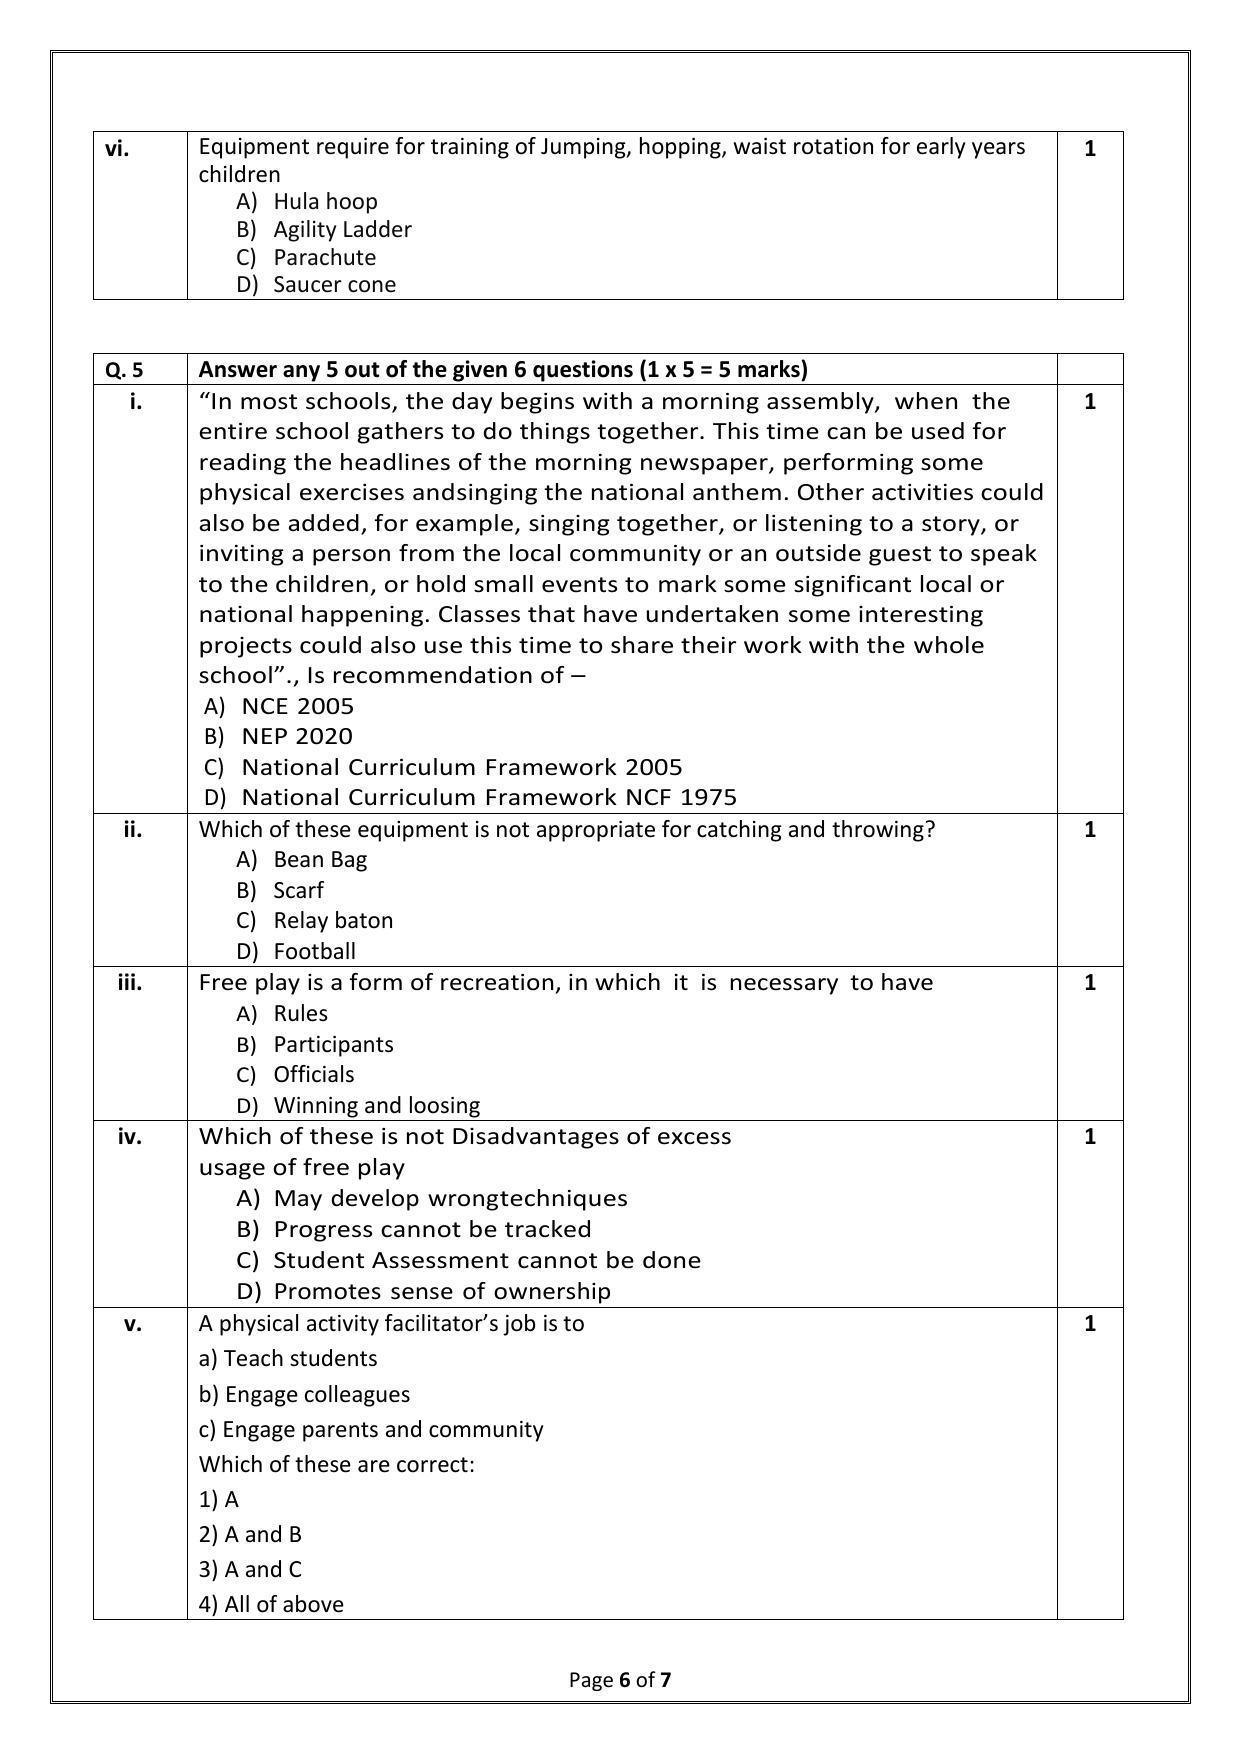 CBSE Class 10 (Skill Education) Physical Activity Trainer Sample Papers 2023 - Page 6